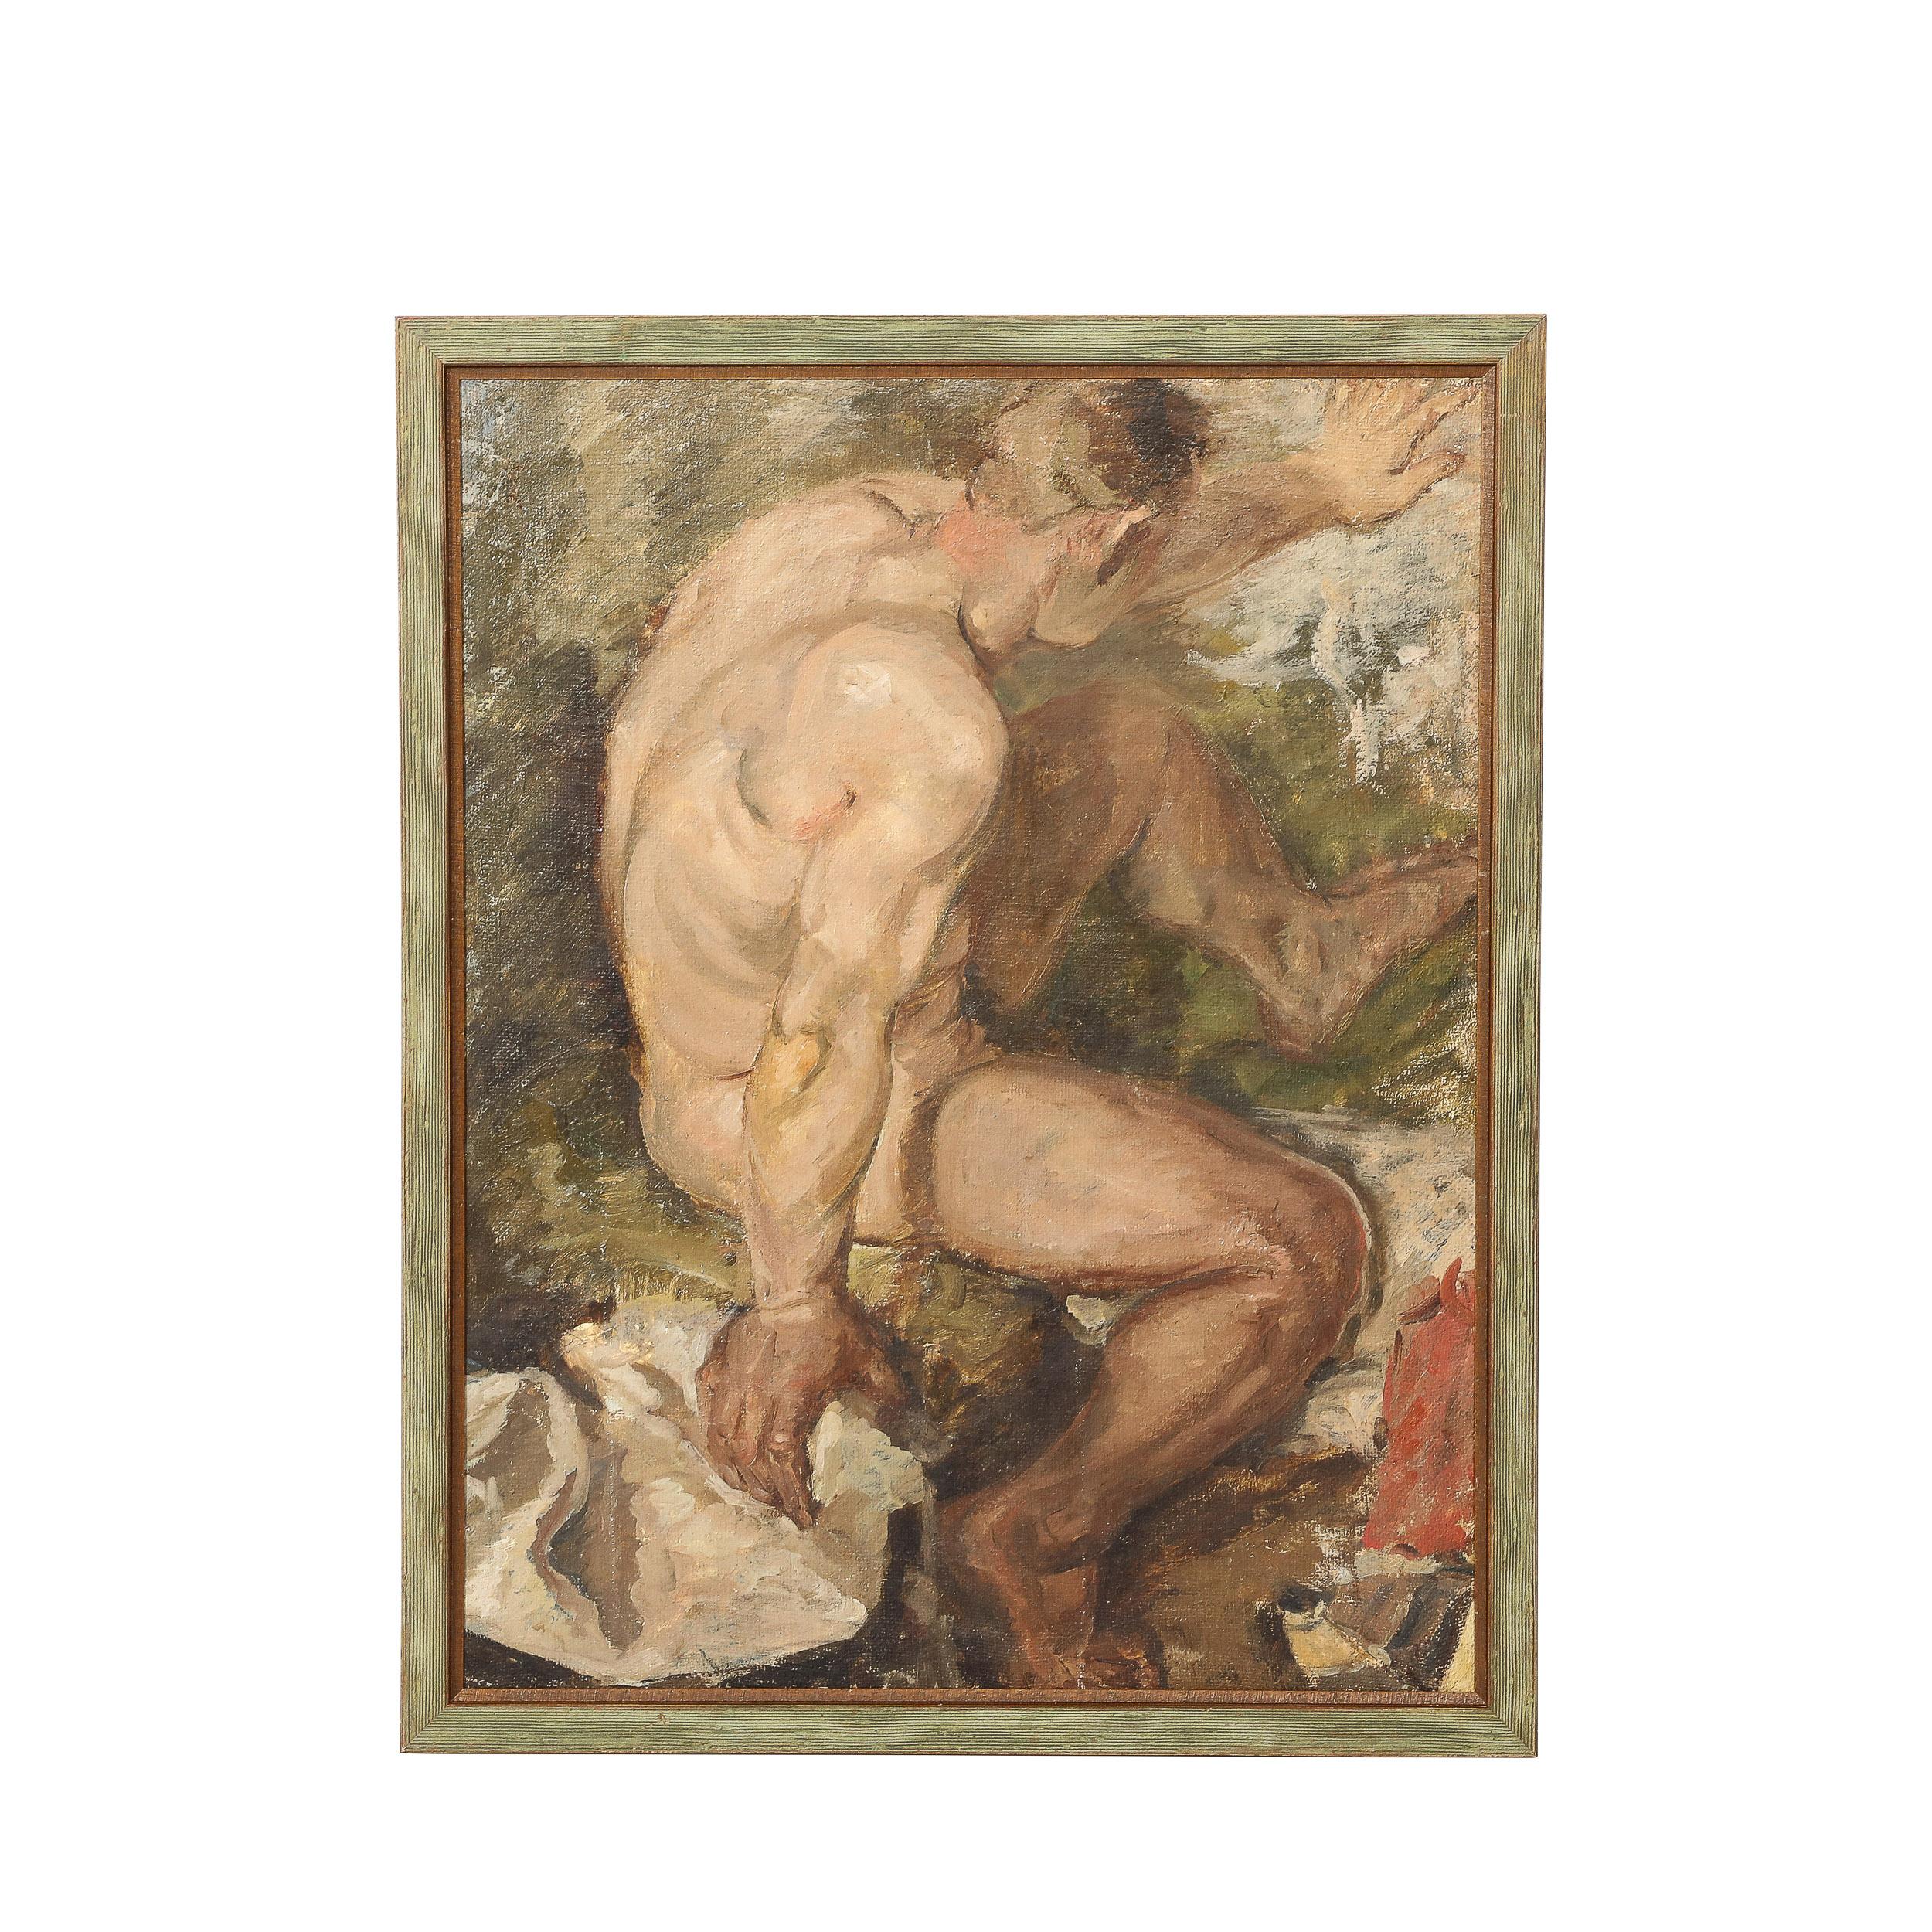 Unknown Figurative Painting - Romanticist Oil on Burlap Painting of a Nude Male Figure Bathing in a River 